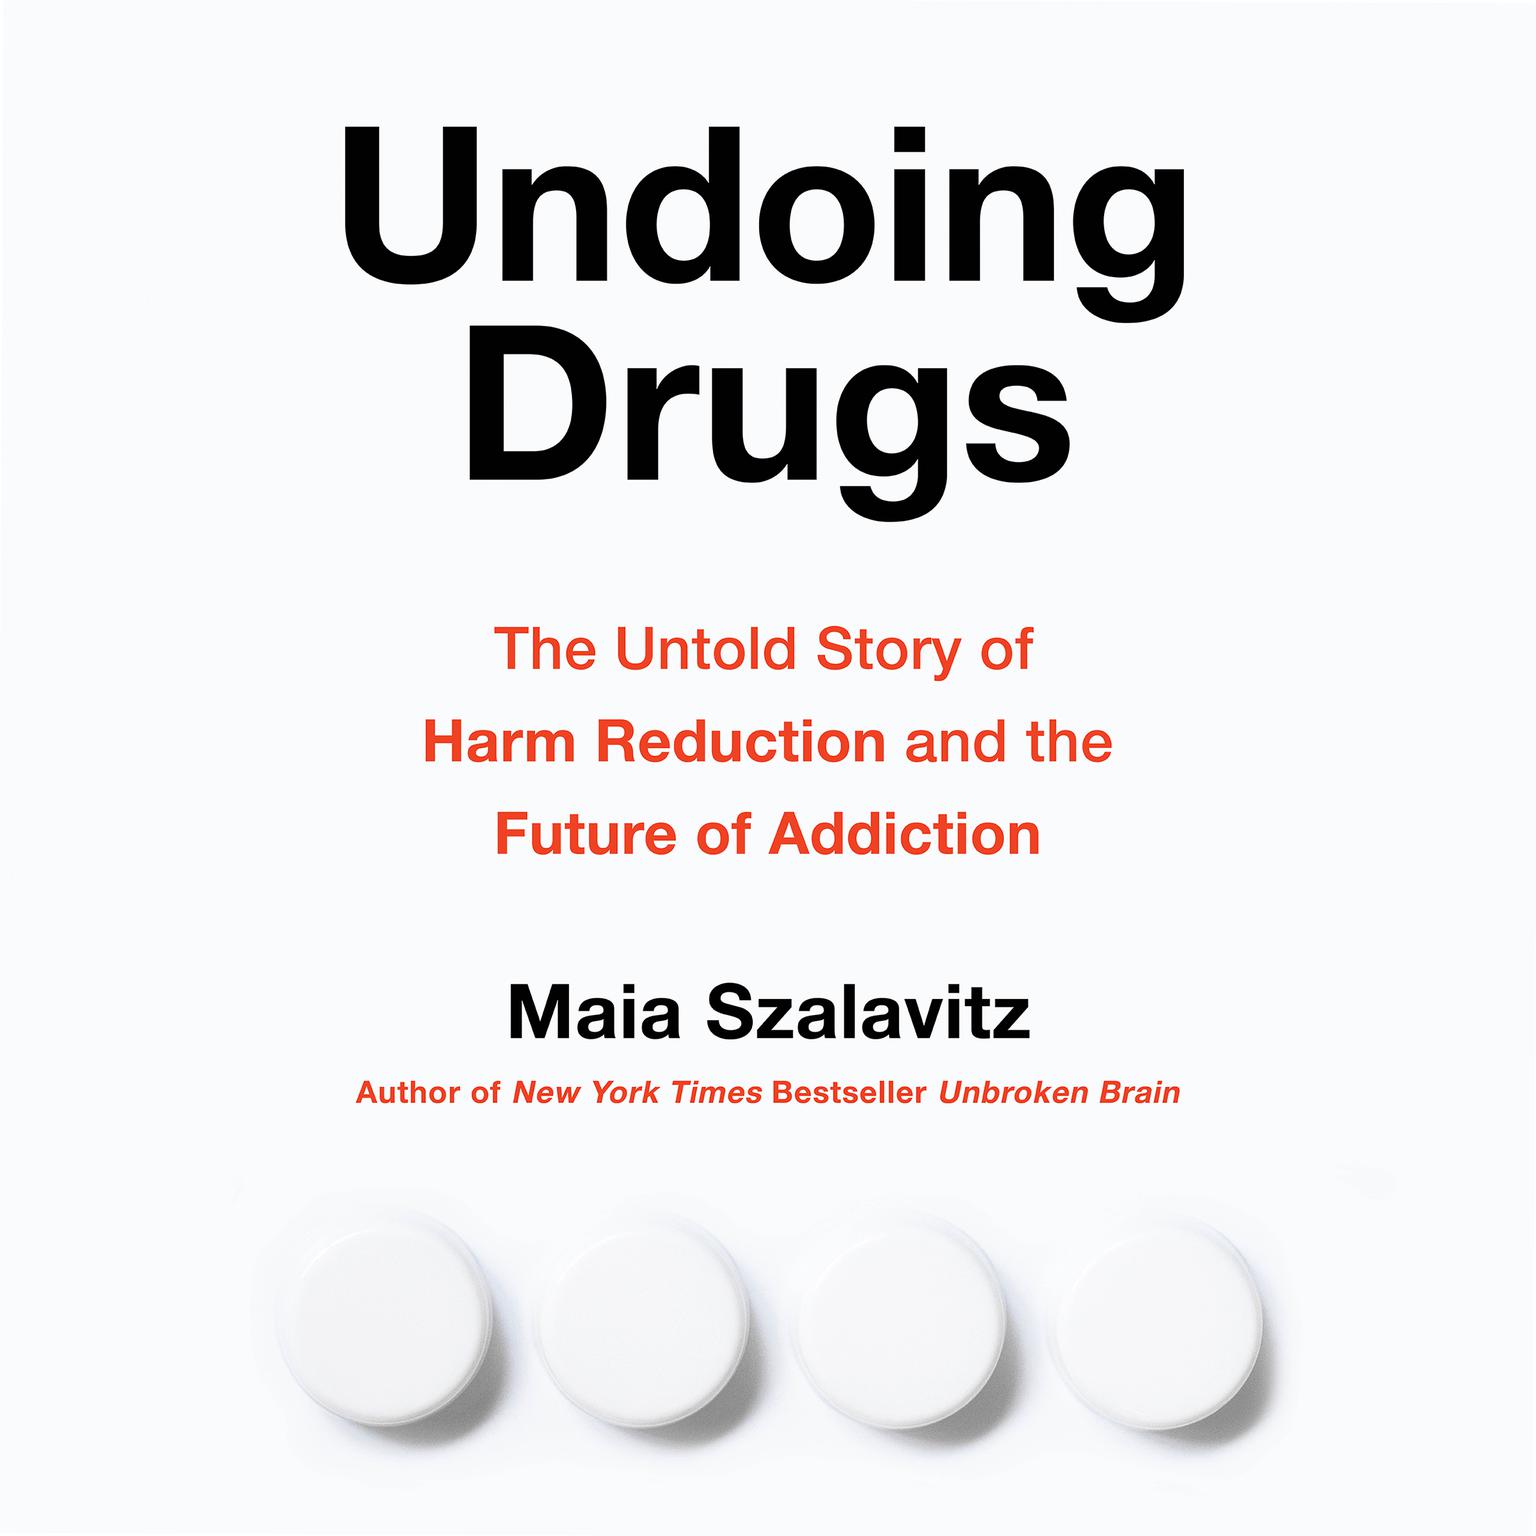 Undoing Drugs: The Untold Story of Harm Reduction and the Future of Addiction Audiobook, by Maia Szalavitz